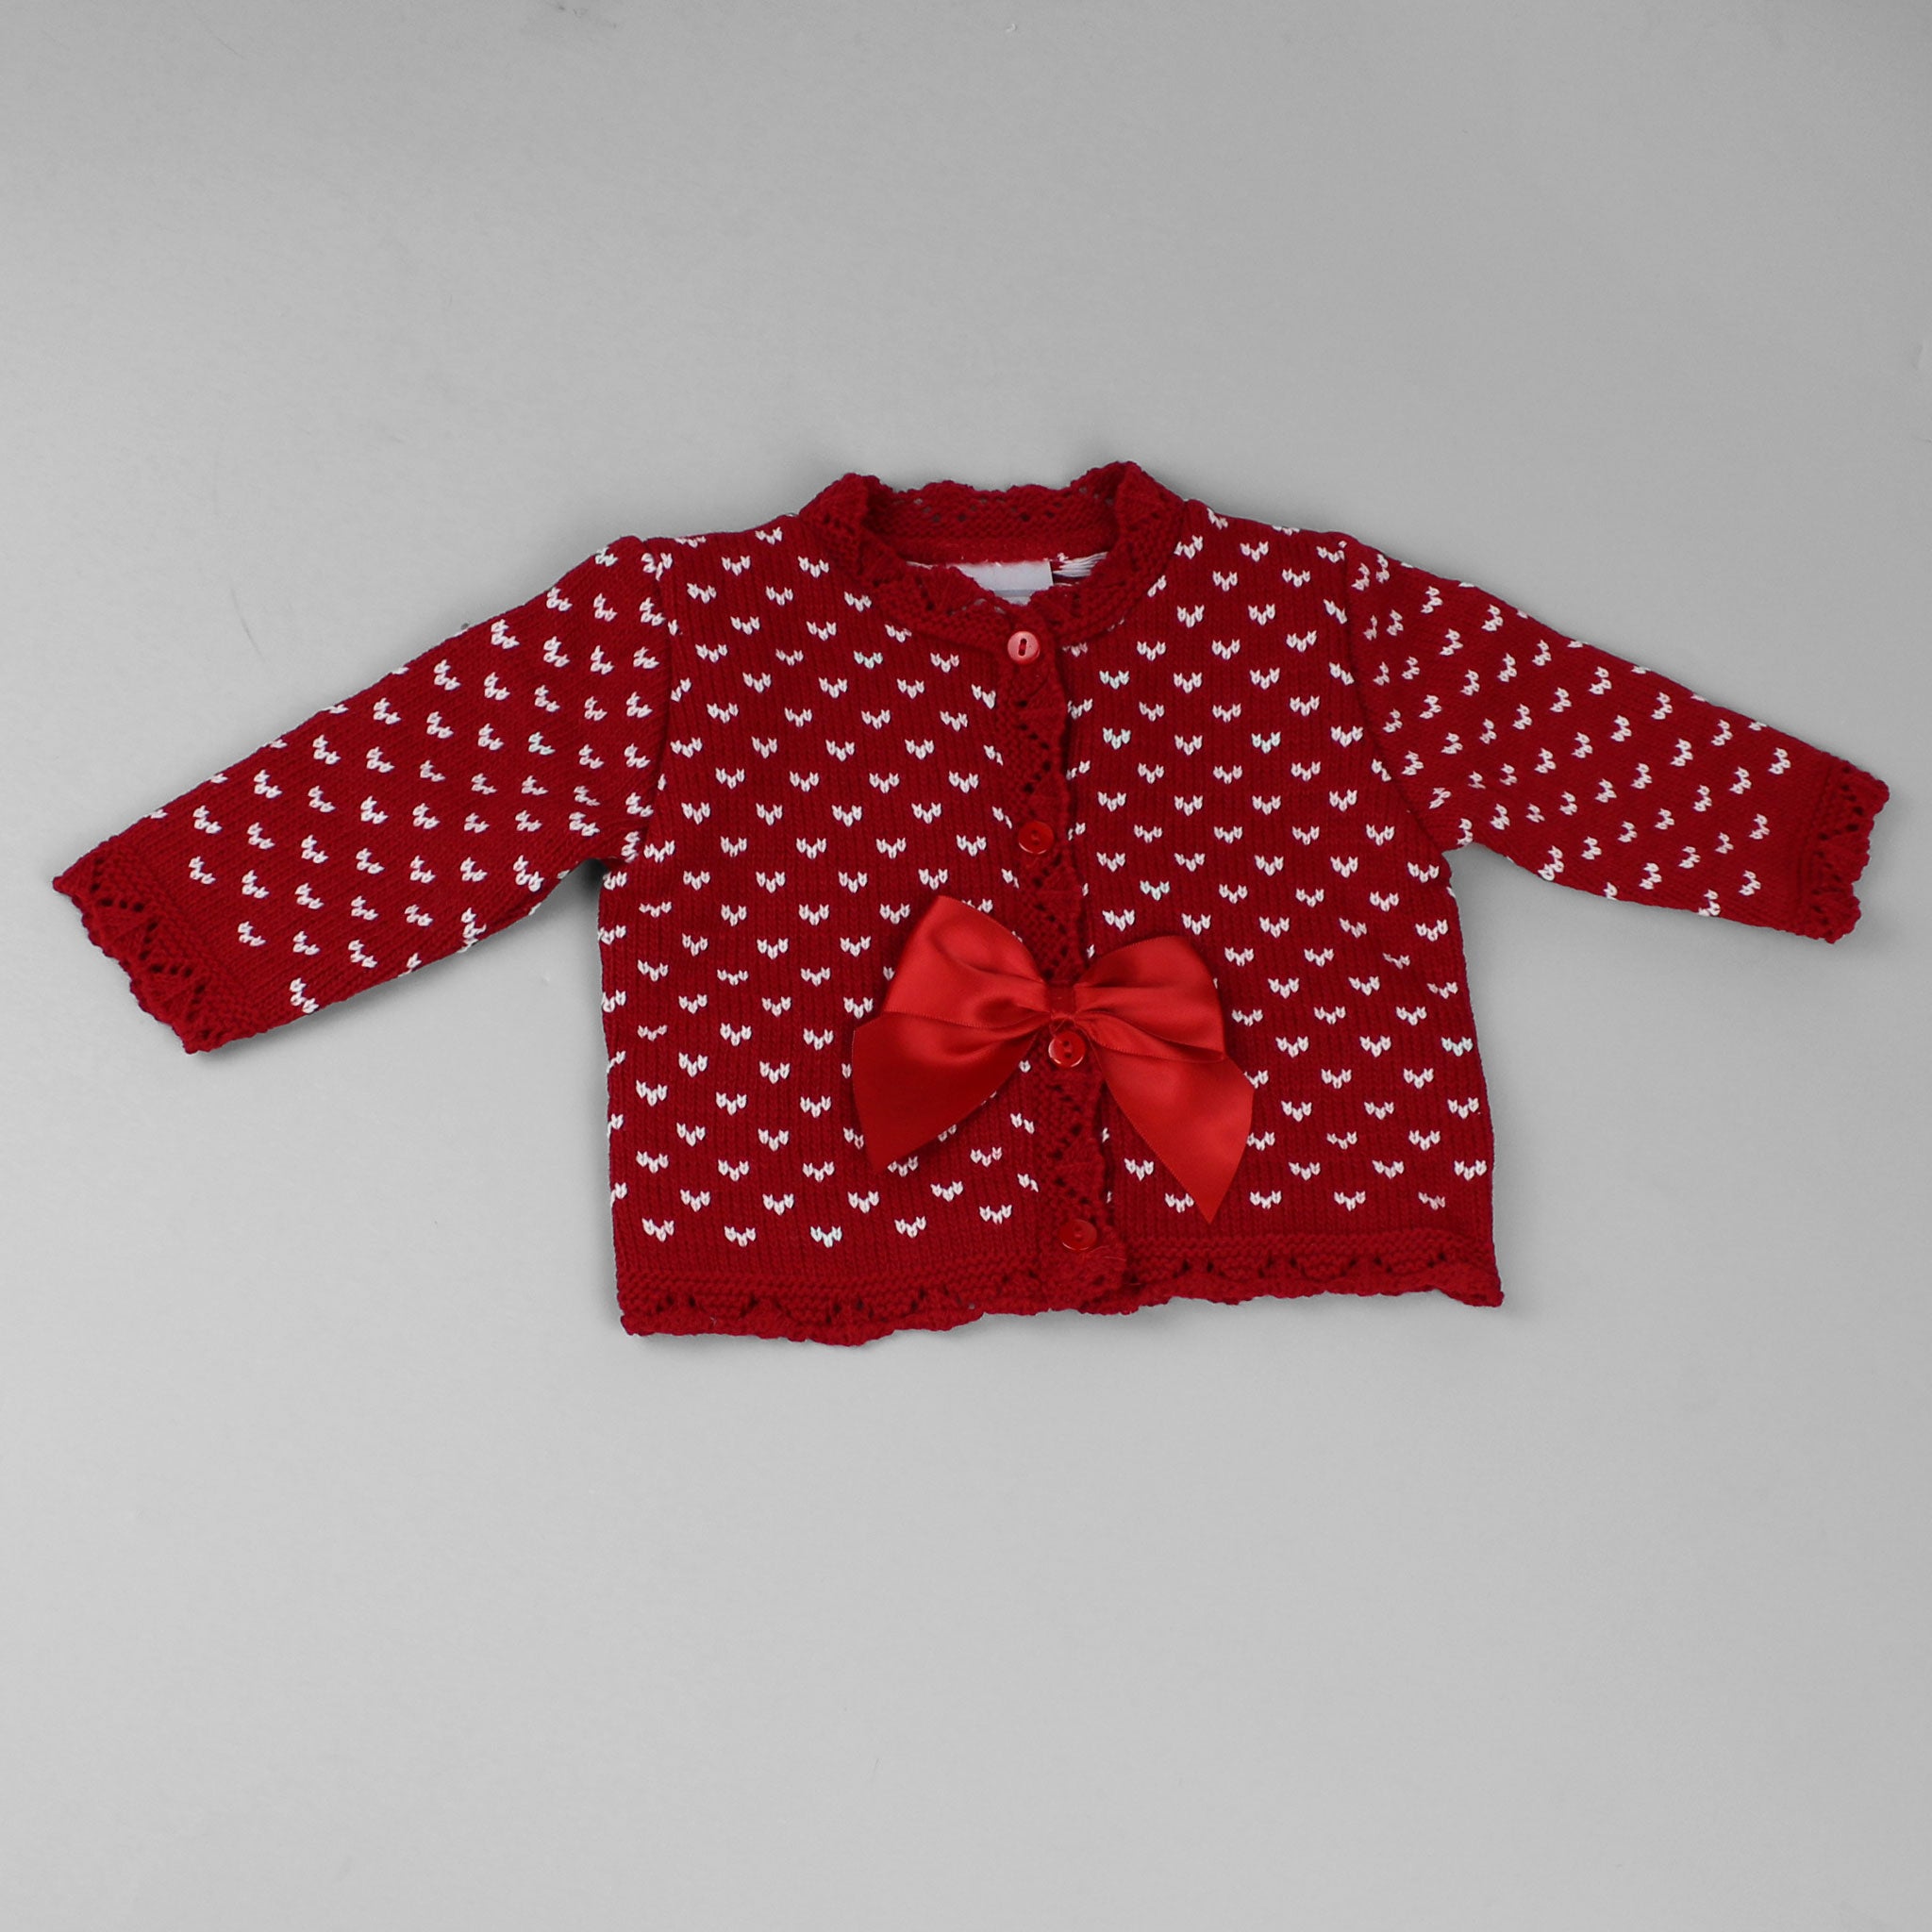 Buy Gymboree Girls Red Sweater with Plaid Collar and Bow (12-18 Months)  online